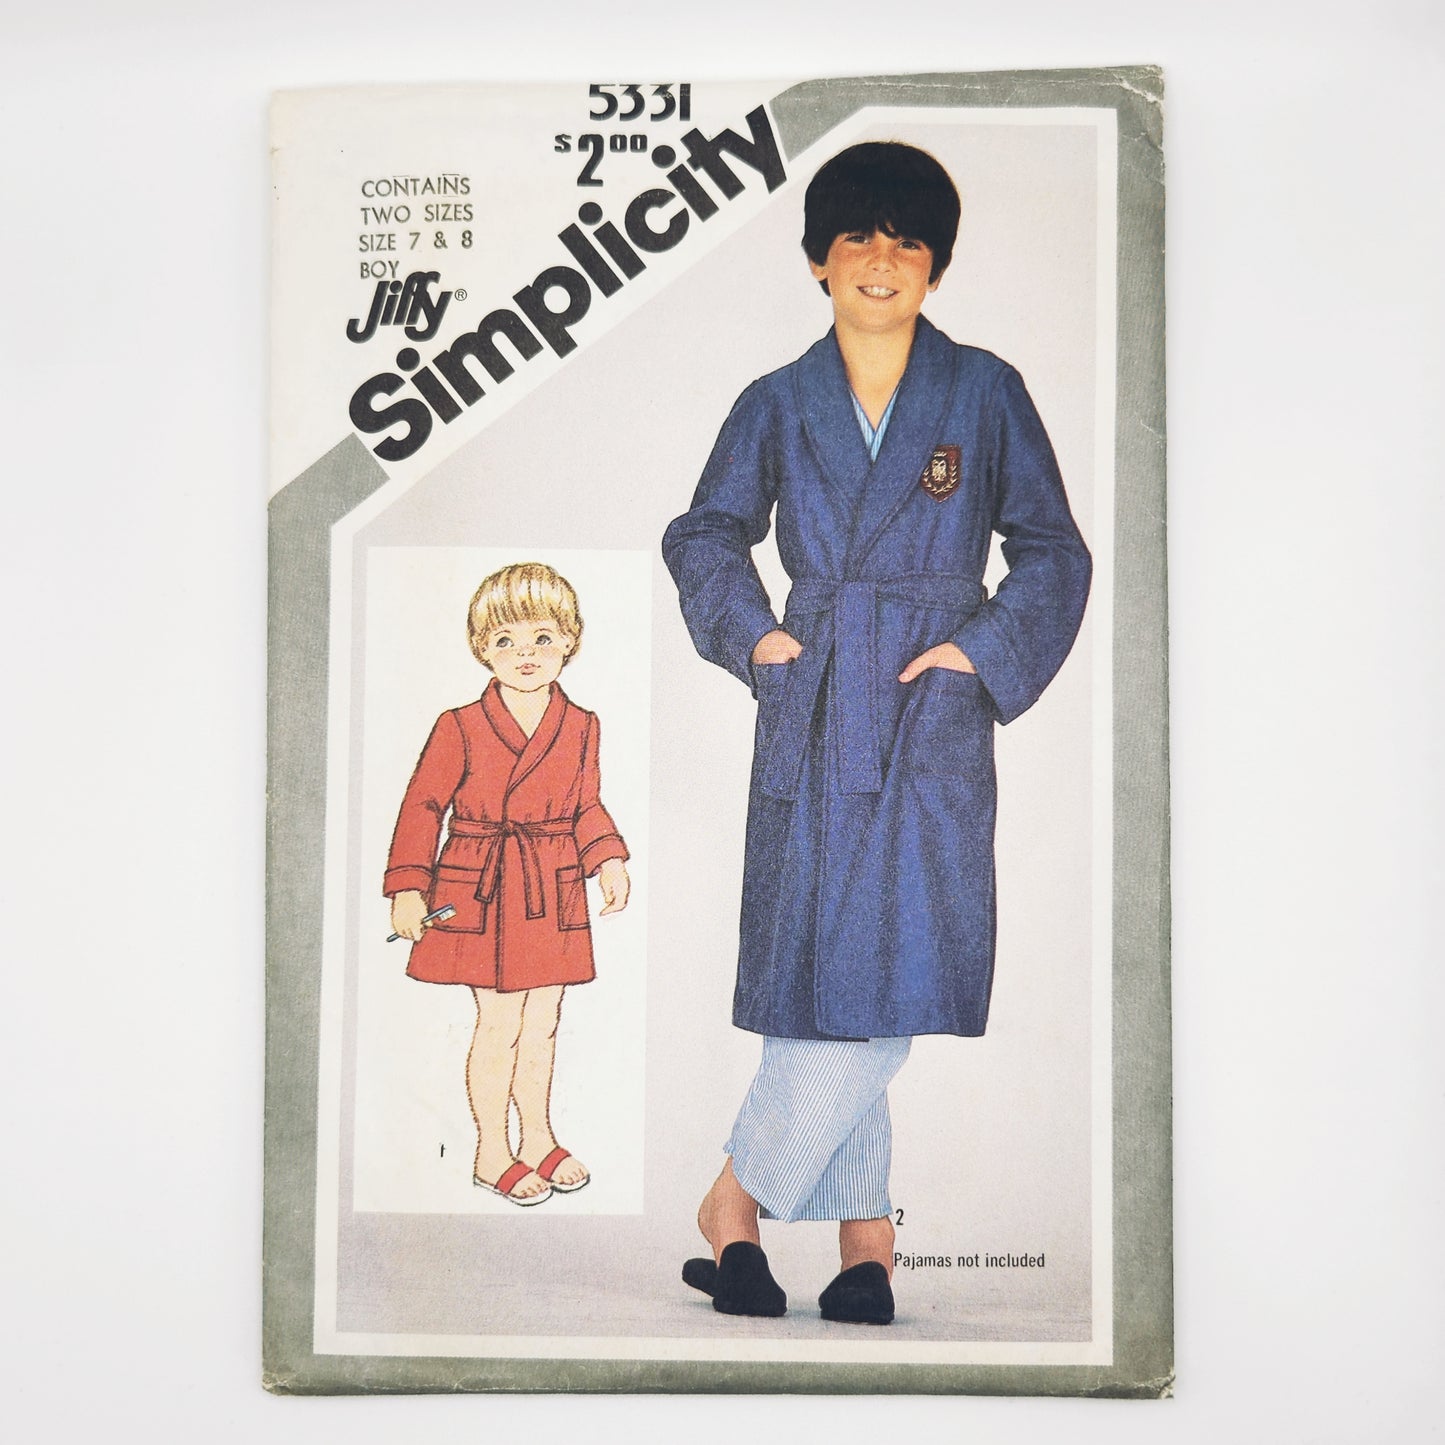 1981 Simplicity Pattern 5331 Boys Robe Two Lengths Size 7-8